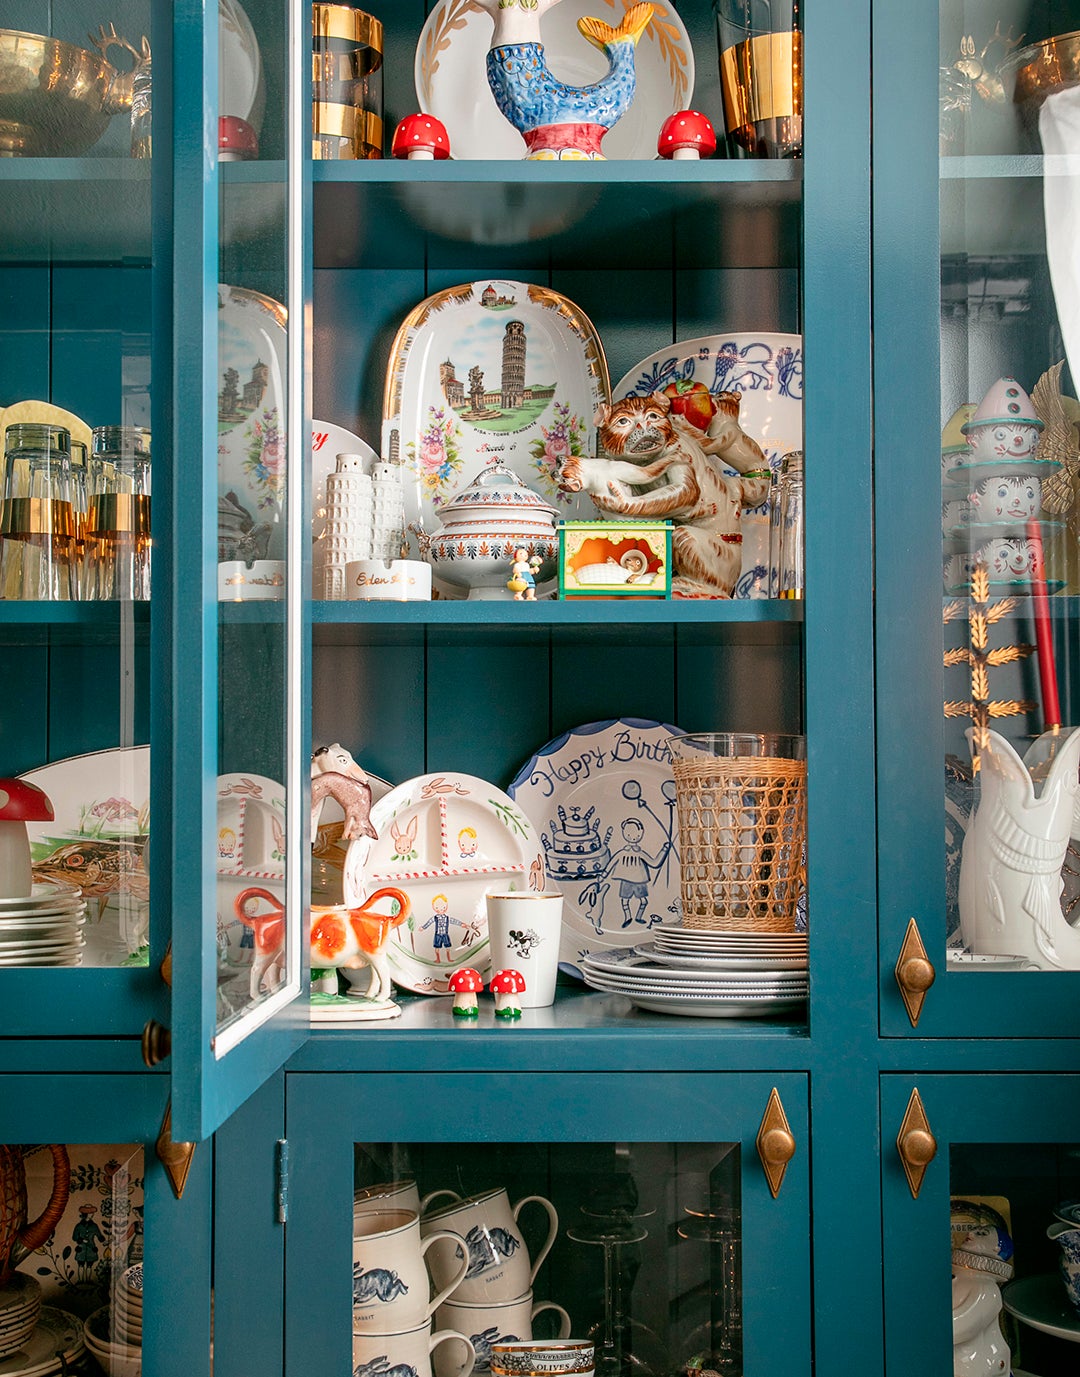 teal cabinets filled with china